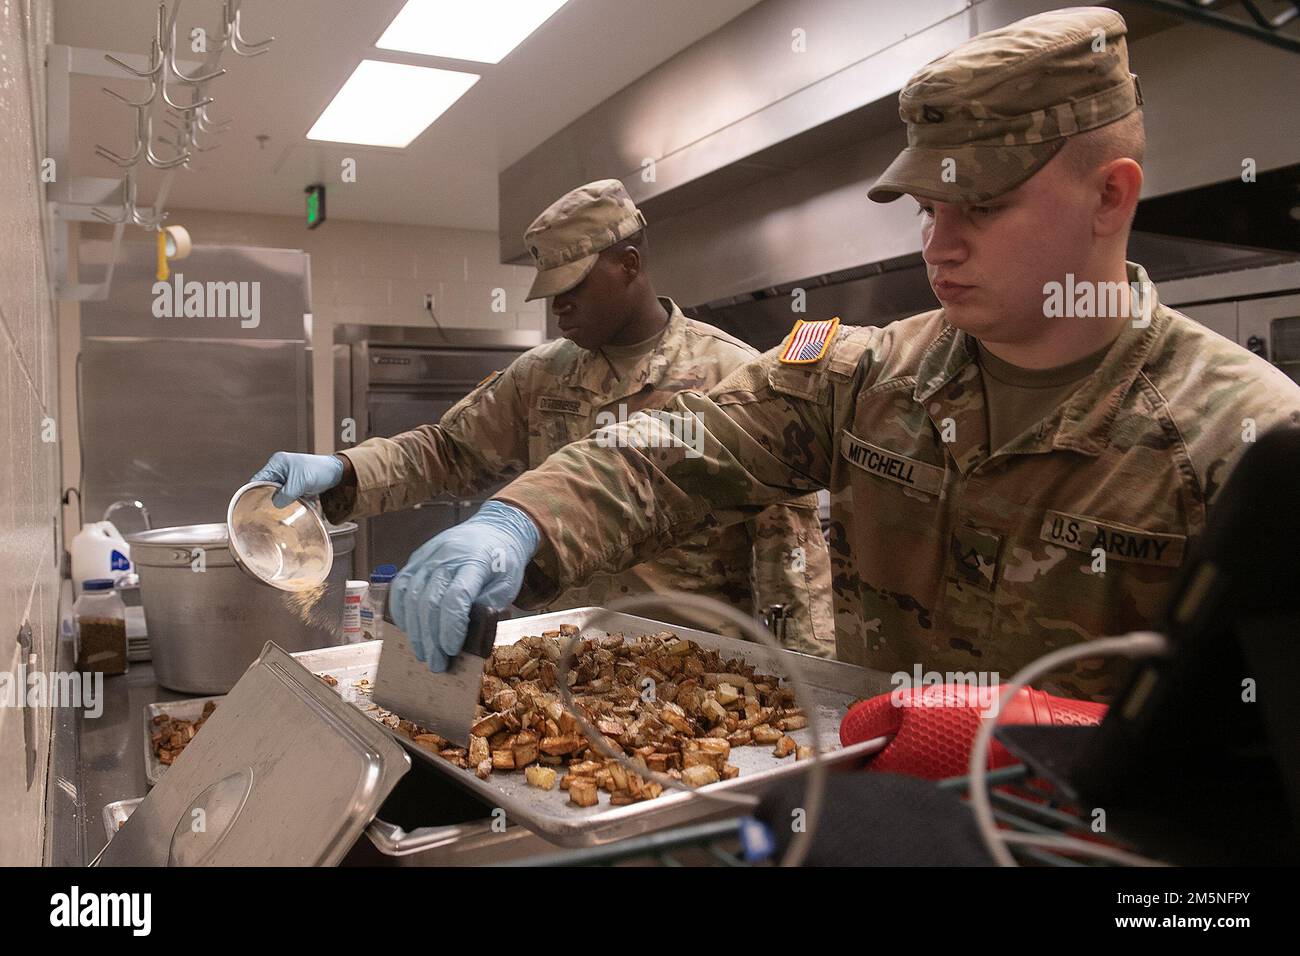 Idaho Army National Guard Spc. Jonah Dittenber (left) and Pfc. Ethan Mitchell cooking in the kitchen.    Napoleon Bonaparte is attributed as saying - “An army marches on it’s stomach.” The saying conveys the importance that soldiers in the field cannot be effective unless they are well fed.    The Idaho Army National Guard's 2-116th Combined Arms Battalion was in the field on the Orchard Combat Training Center in the final days of March, in preparation for an upcoming deployment in support of Operation Spartan Shield.    The training was rigorous and diverse. While each company completed their Stock Photo